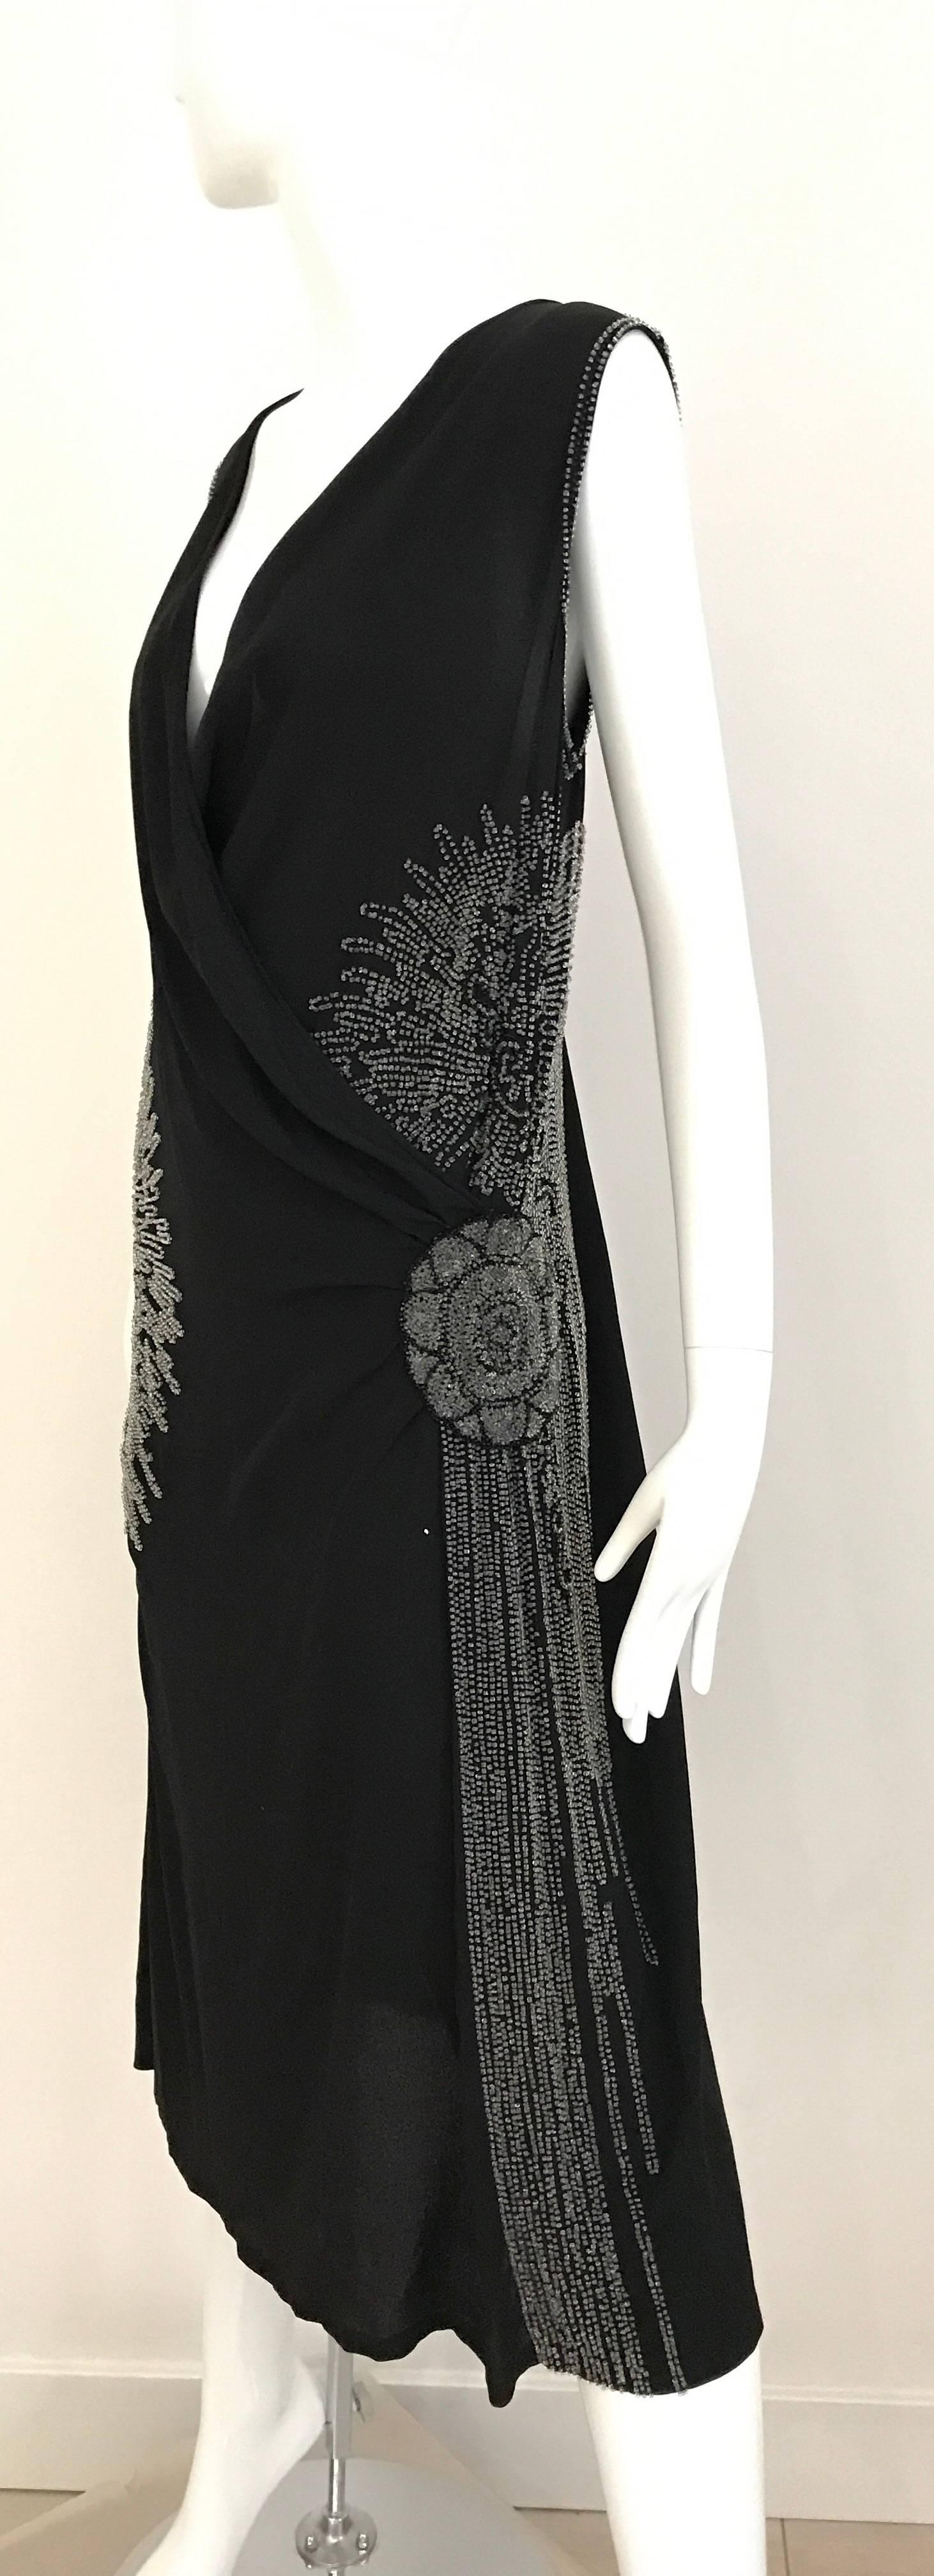 Beautiful Large Size 1920s Black Silk V neck sleeveless flapper dress with clear bugle beads beaded in floral pattern. Fit US SIZE 6/8
Bust : 40 inch
Waist: 34 inch
Hip: 42 inch
Length 44 inch
